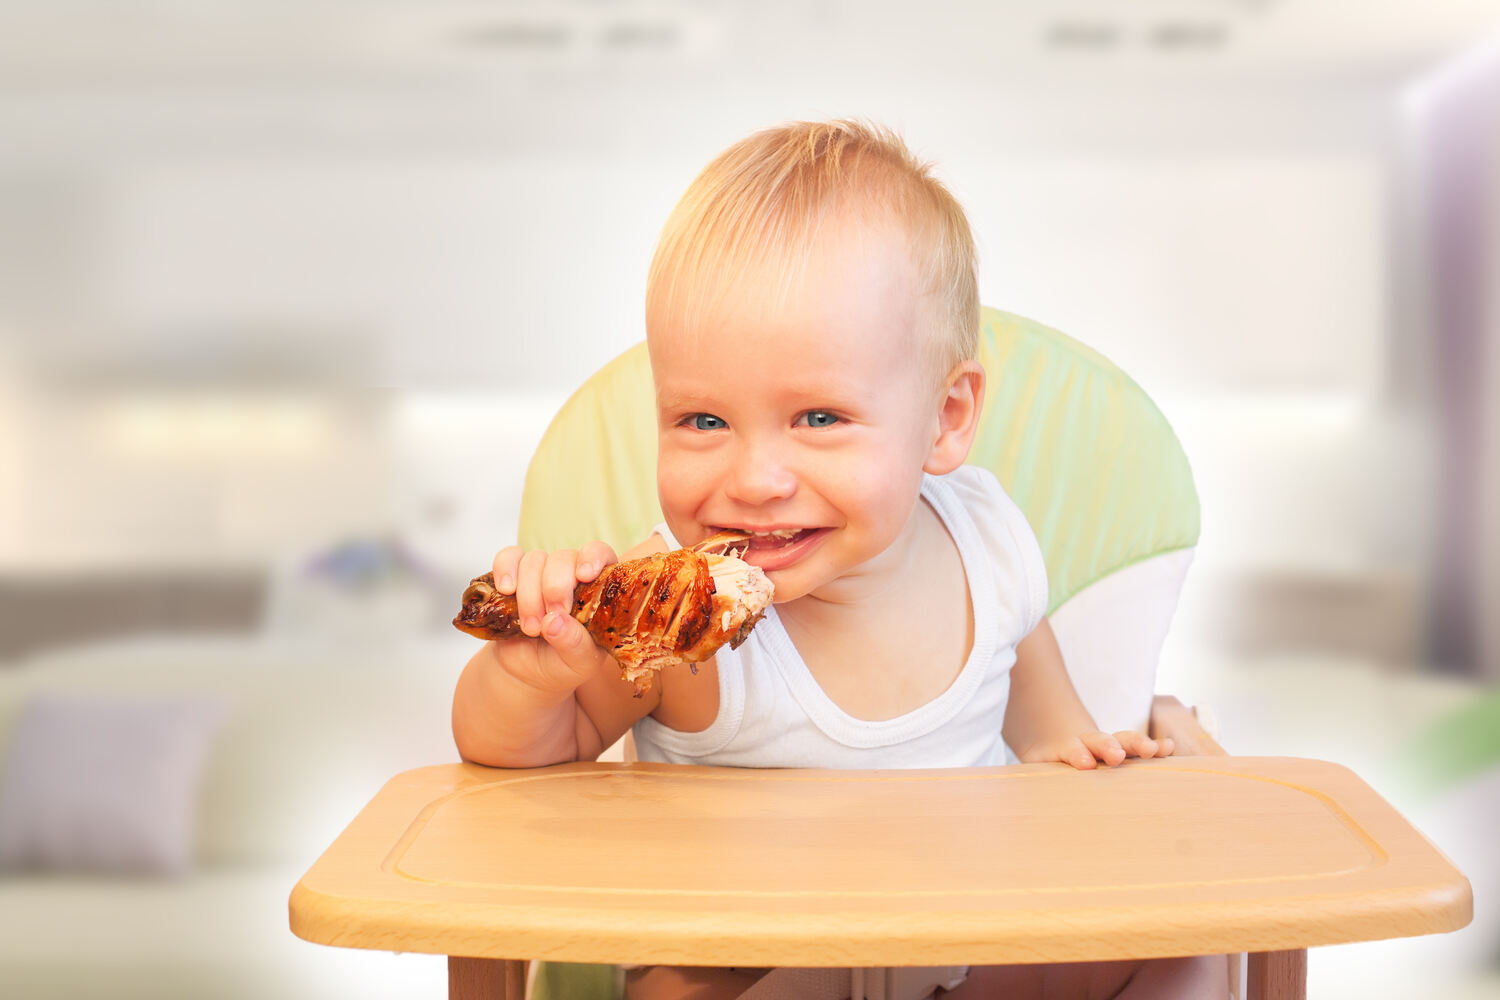 When can toddlers eat meat